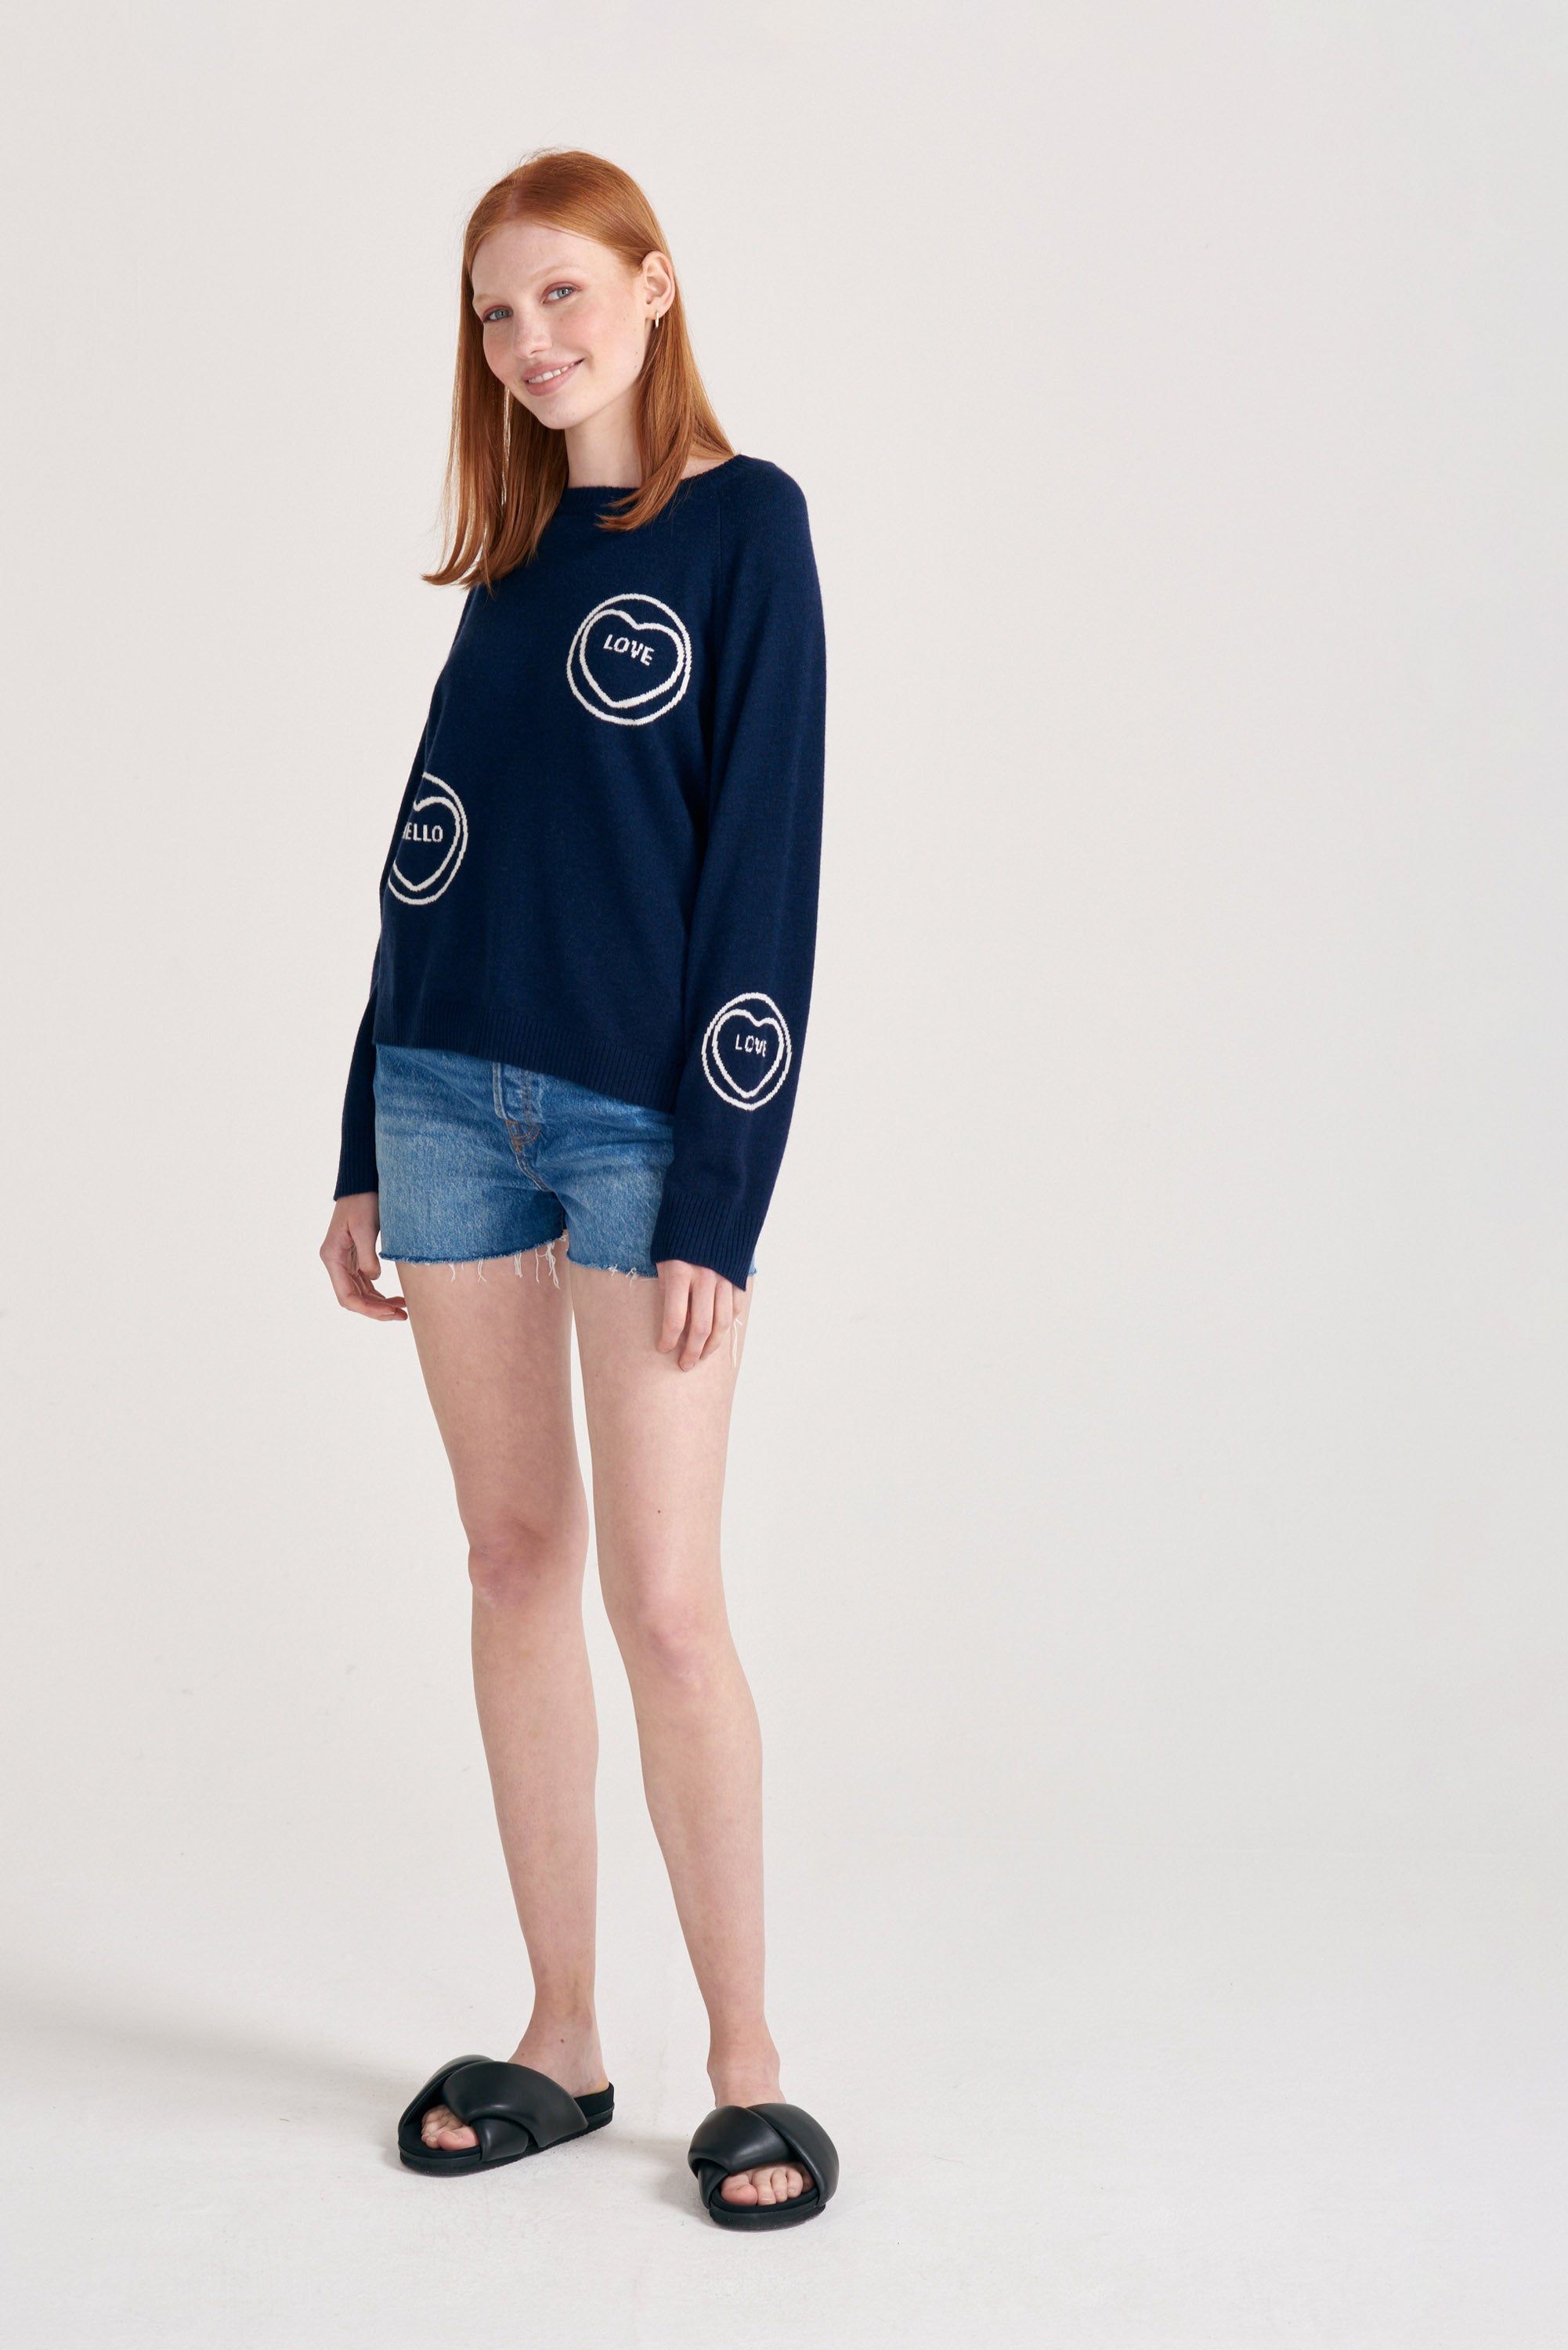 Red haired female model wearing Jumper1234 navy cashmere and wool mix crew neck sweatshirt style jumper with all over cream love hearts intarsia